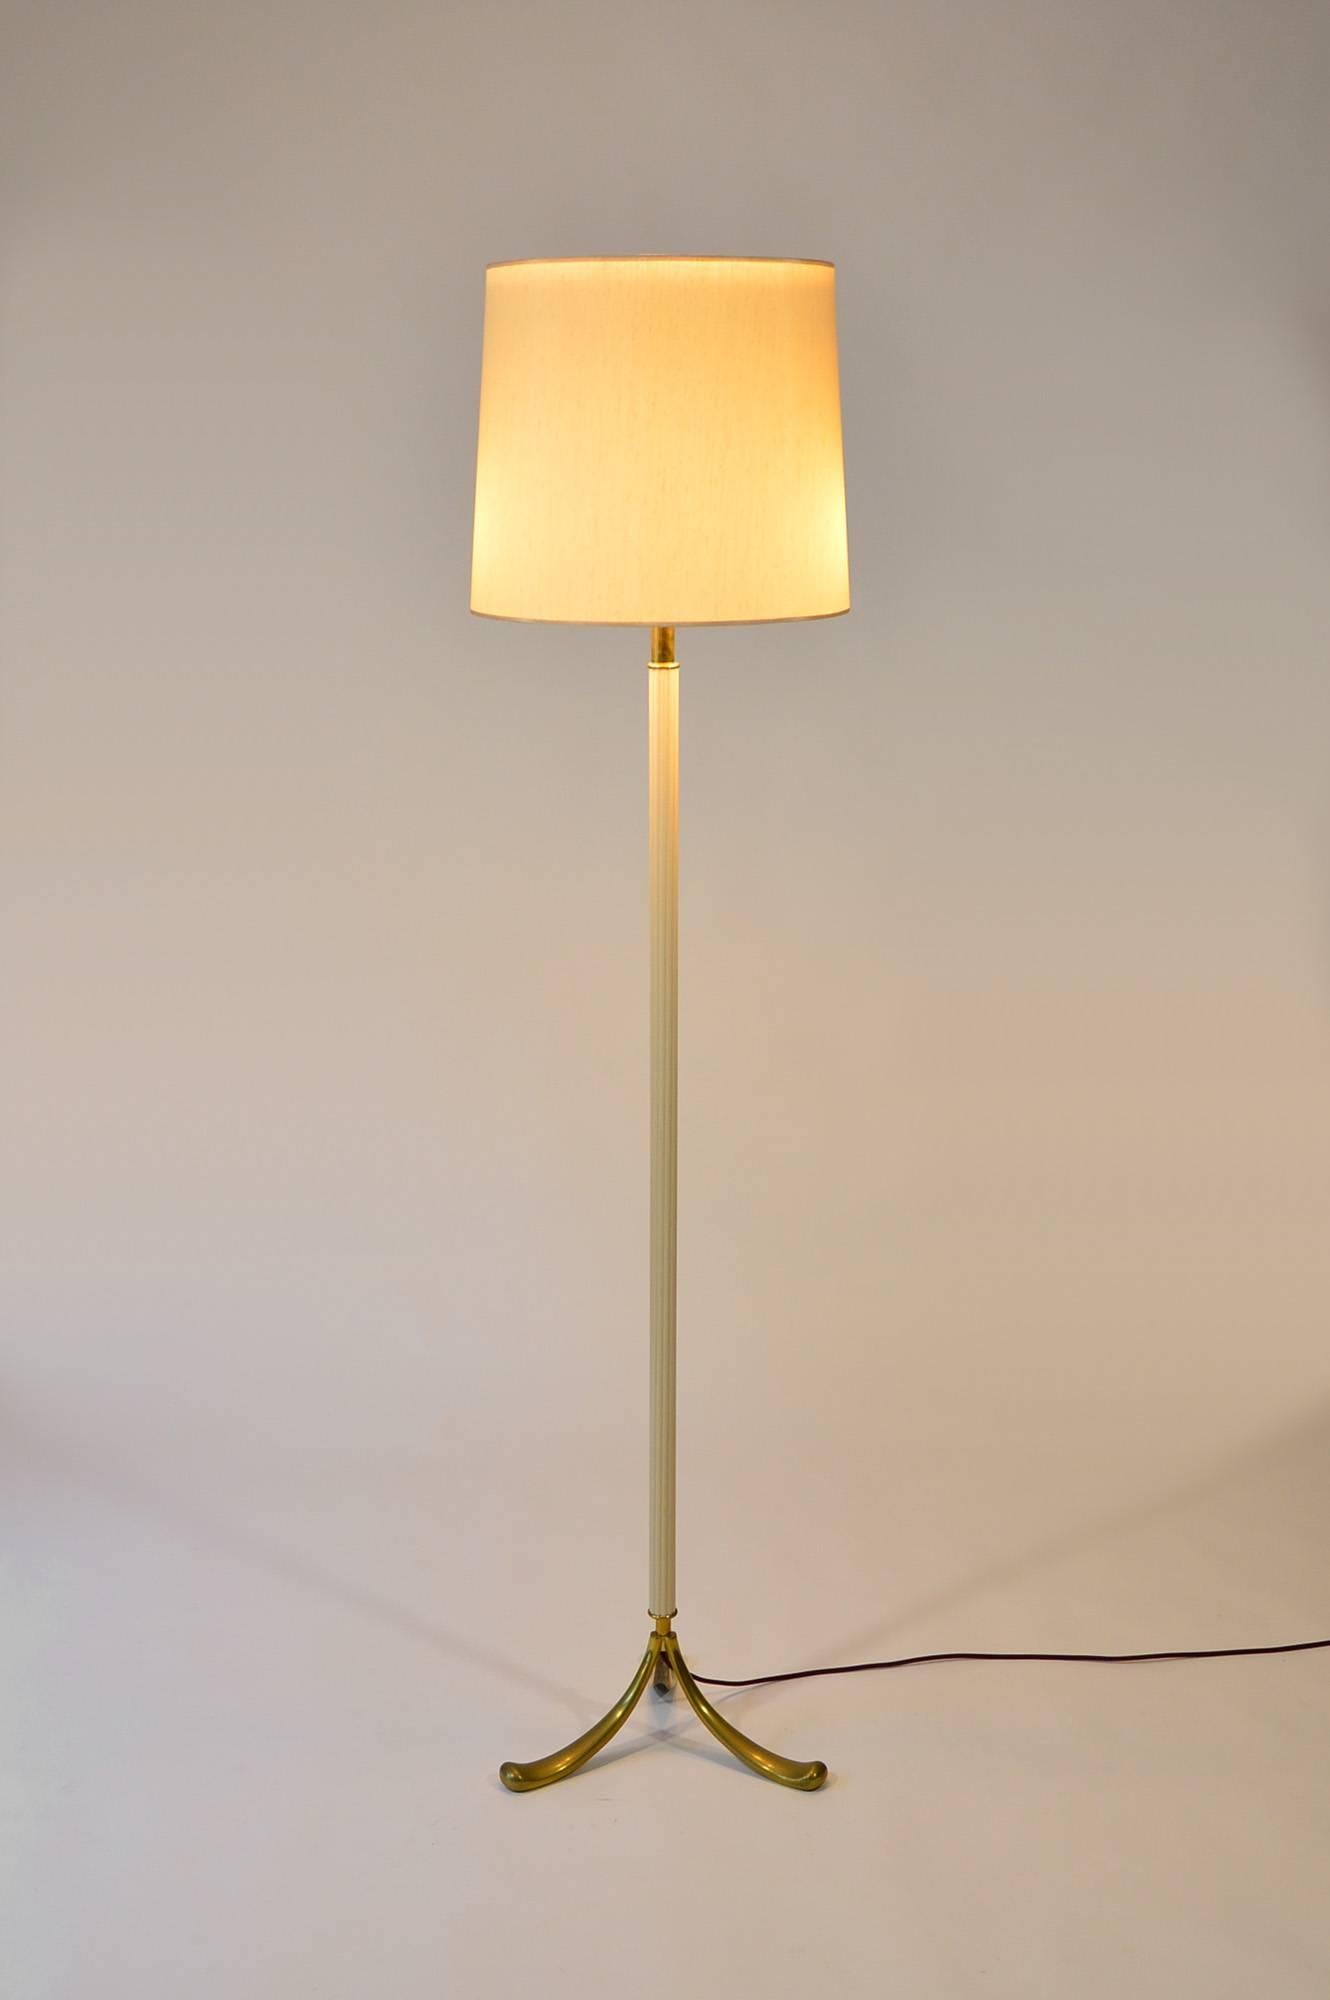 Standard lamp manufactured in Italy, circa 1940, with tripod die casted brass base and stem made of a plastic that we believe being galalith (alladinite).
It carries three bulbs with E27 screw sockets, two on the sides and one into the upper